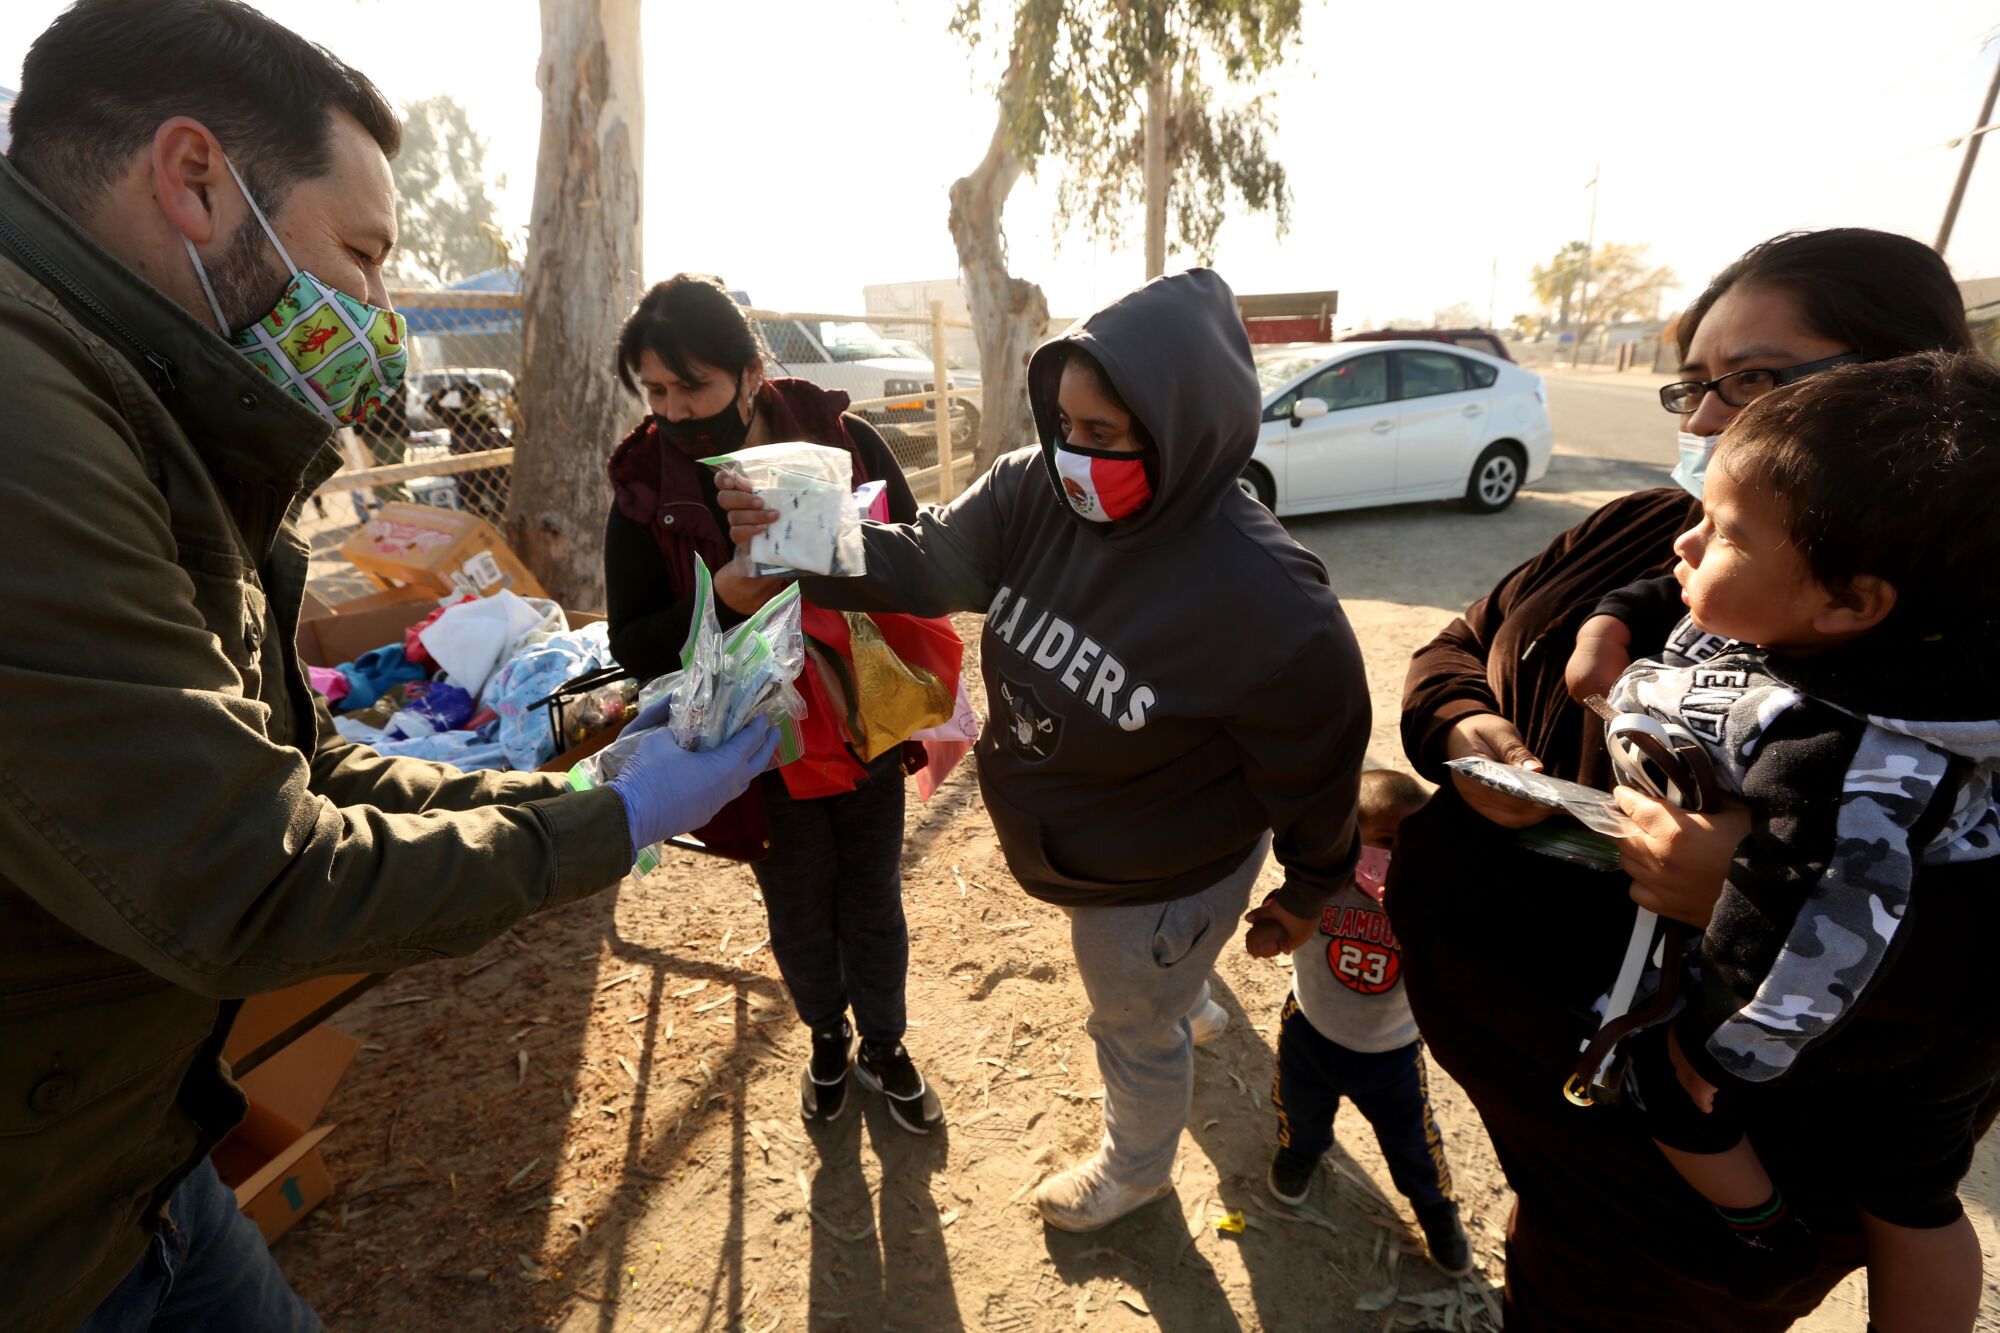 A man hands out masks to families standing in a dusty field